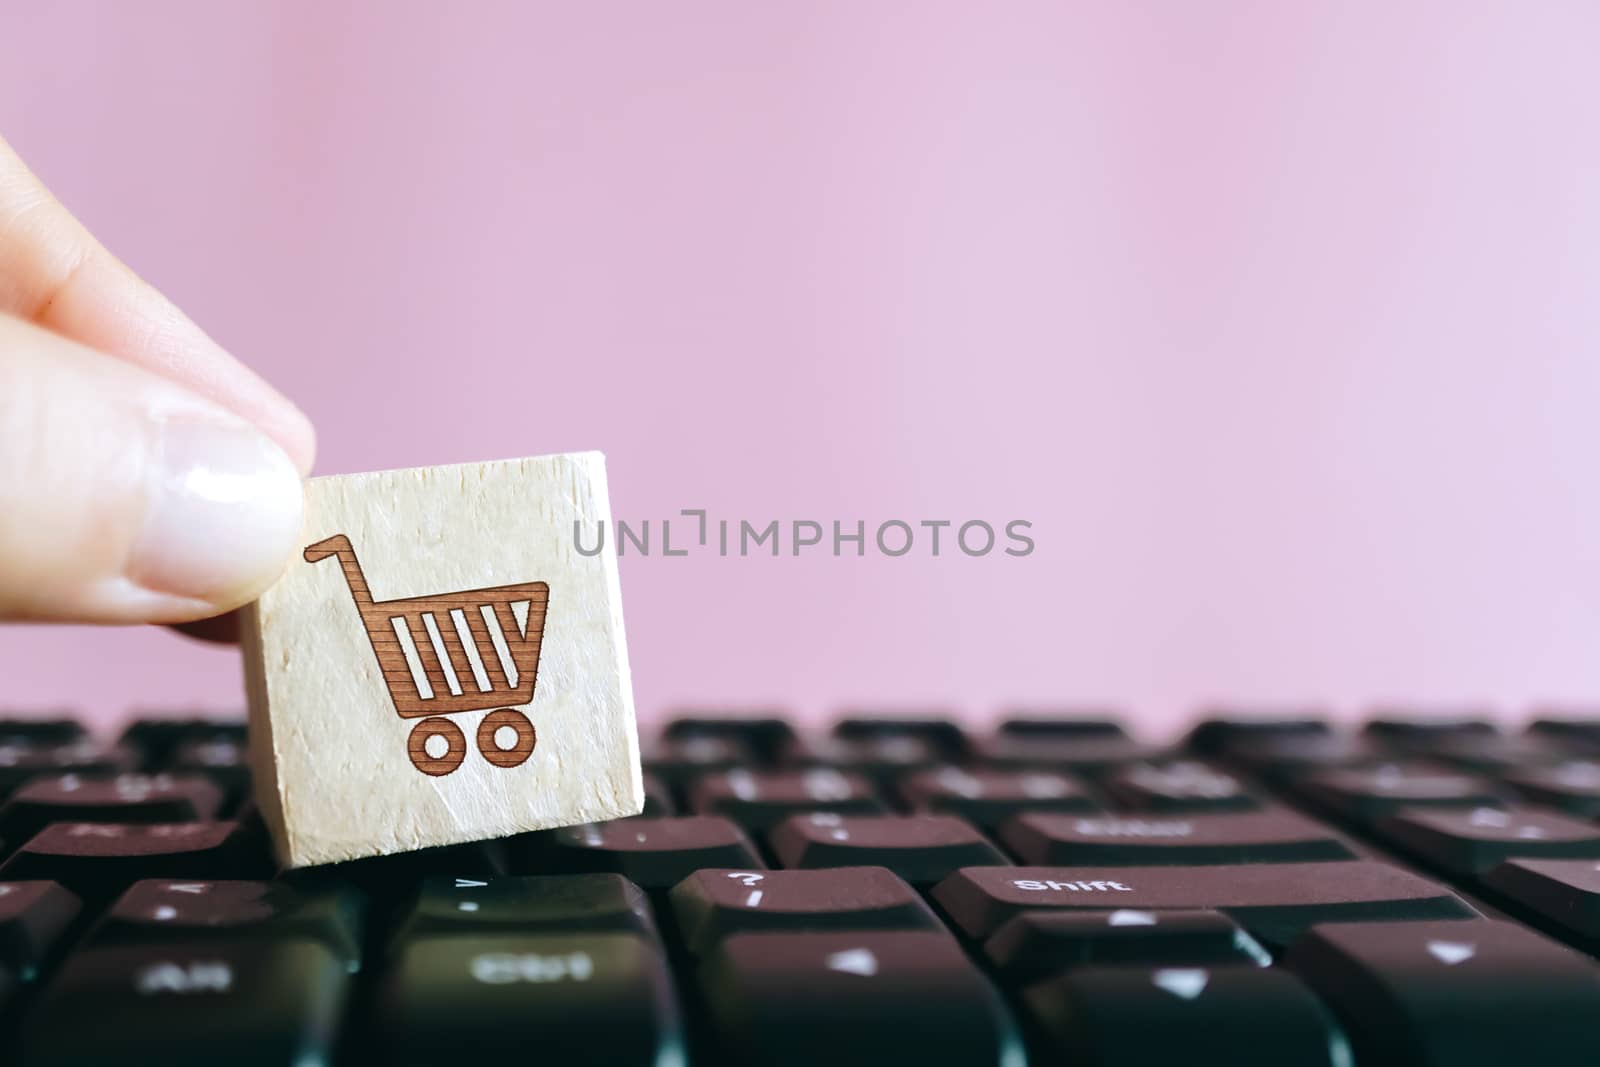 Closed up shopping cart icon on wood cube on computer keyboard. Online shoping business technology concept.